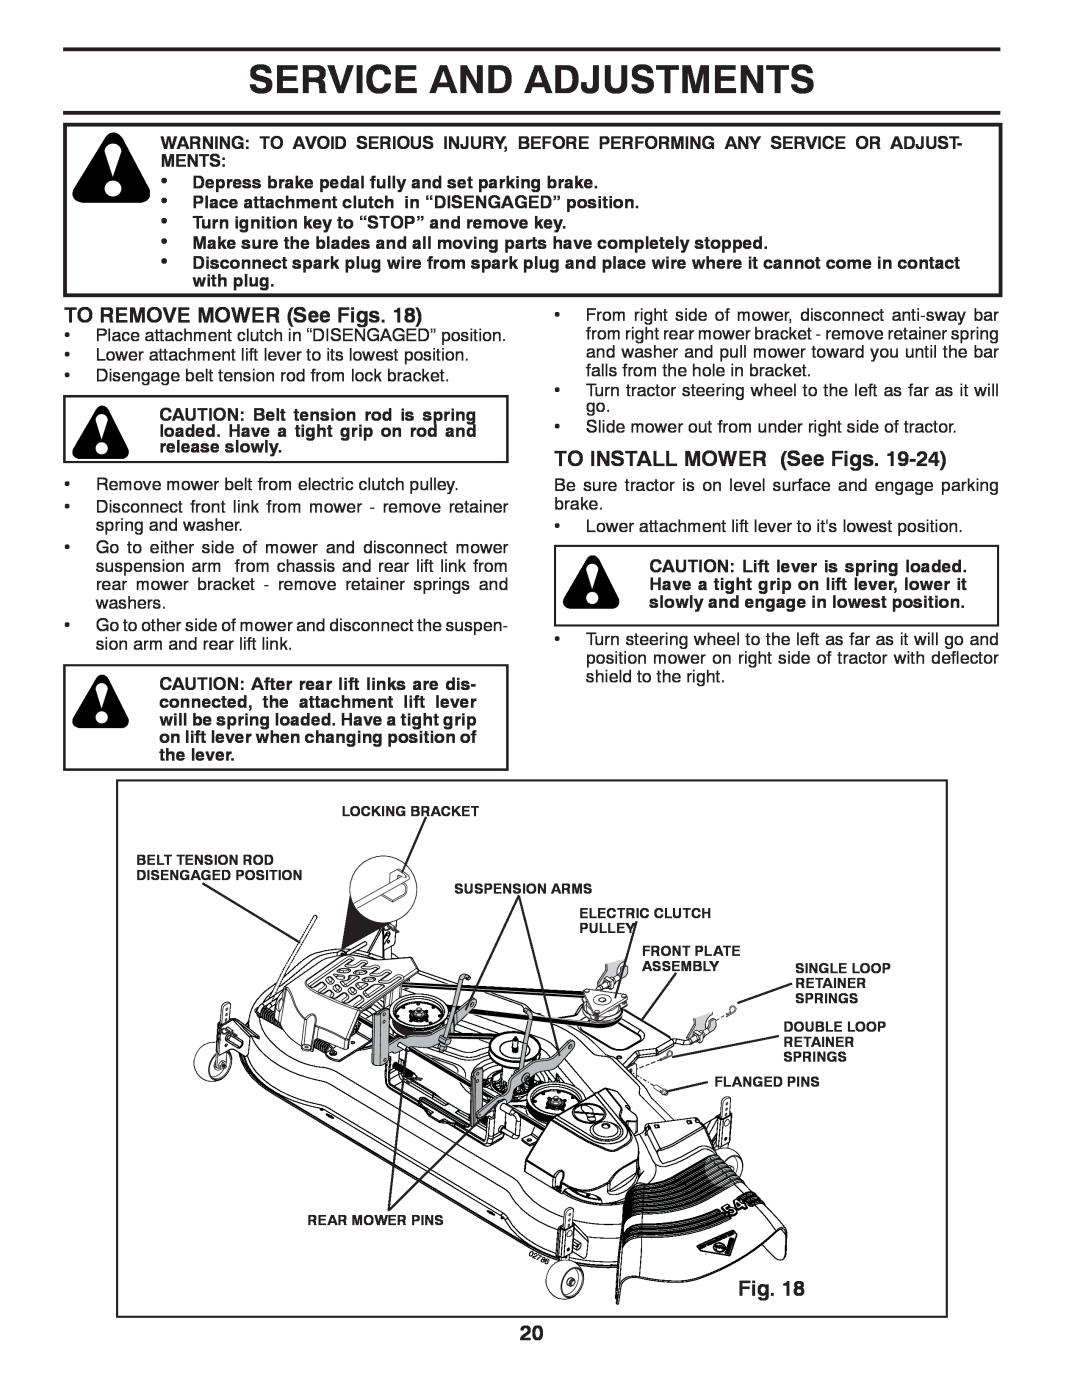 Husqvarna YTH2454 owner manual Service And Adjustments, TO REMOVE MOWER See Figs, TO INSTALL MOWER See Figs 